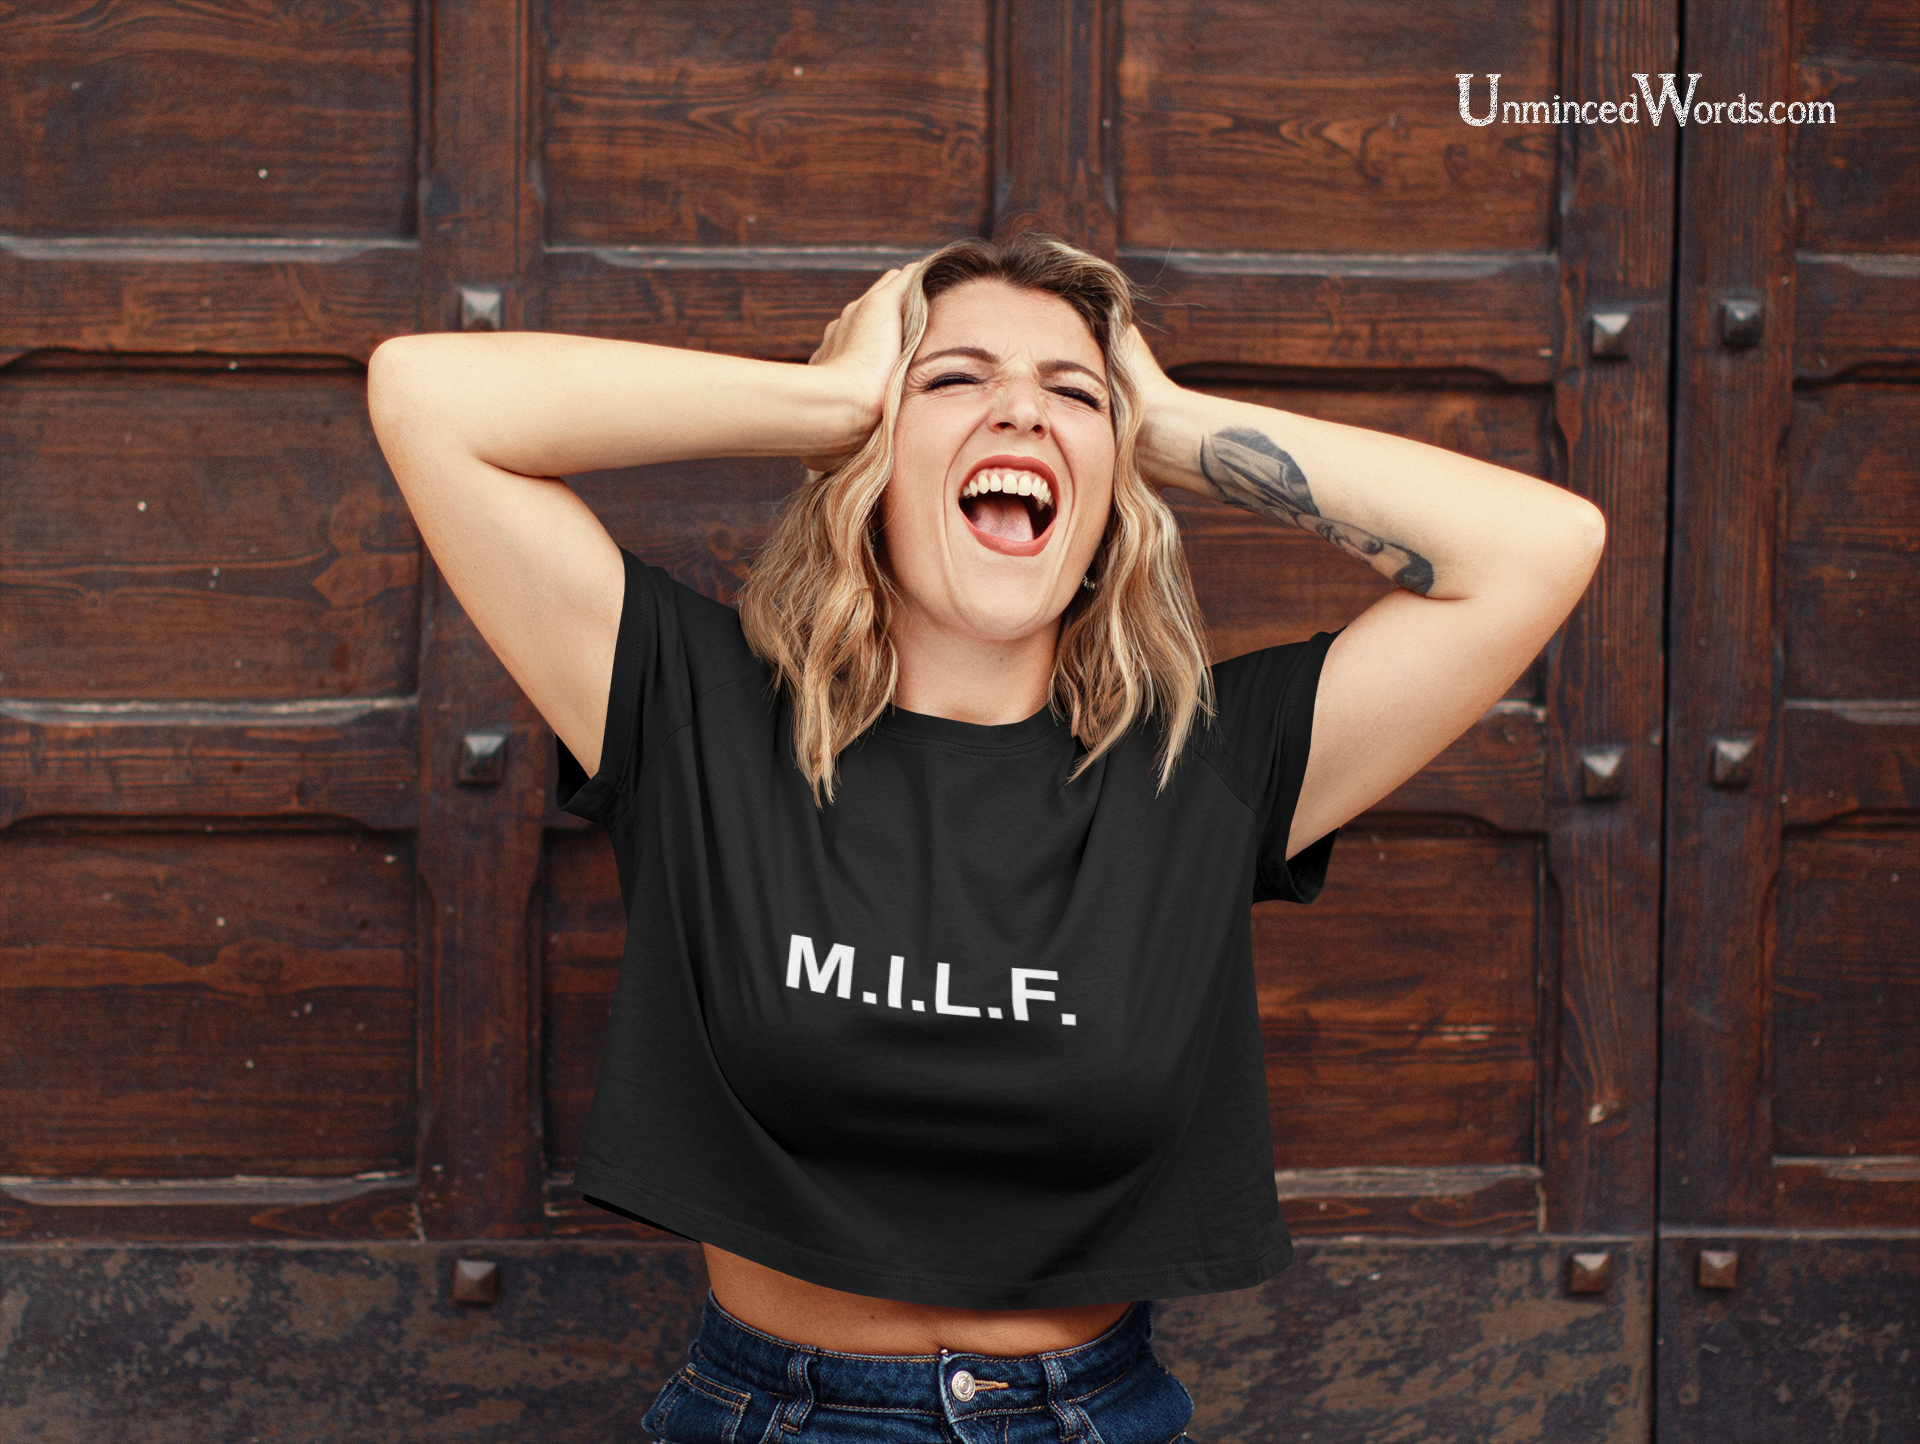 MILF Designs make for great gifts